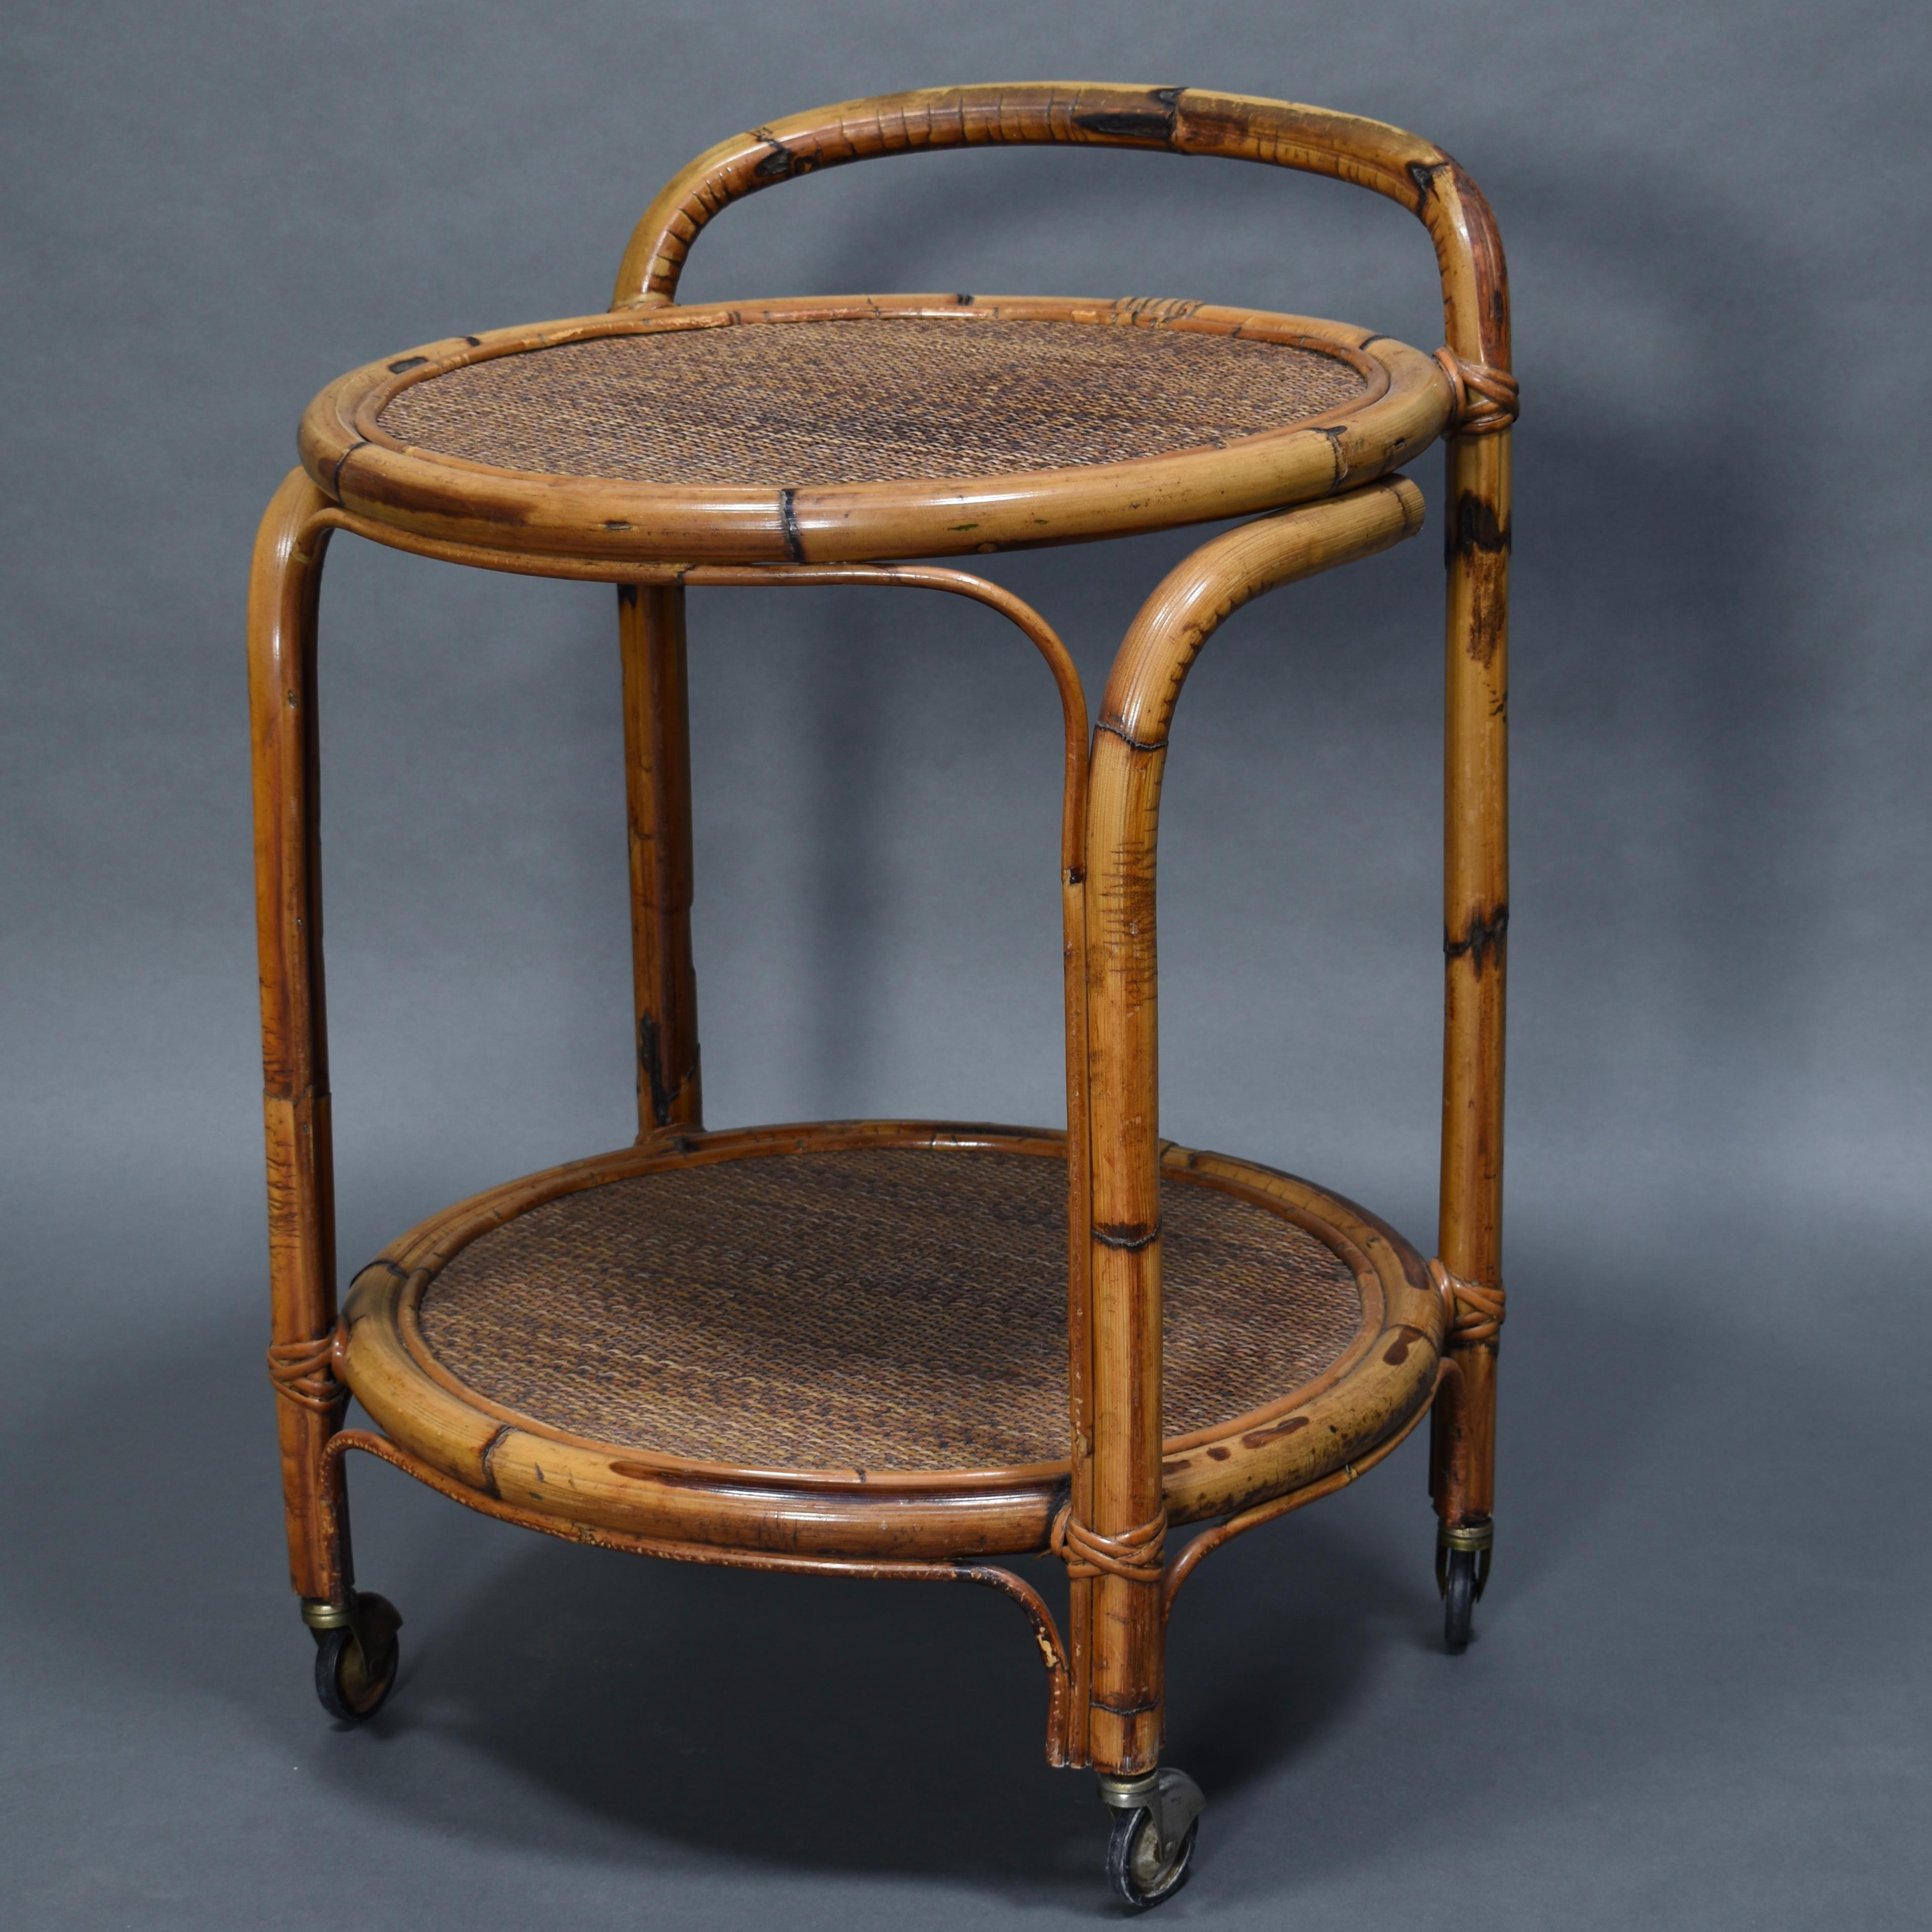 French 'Riviera’ bar cart made of Bamboo and Rattan, circa 1960.

Designer: Unknown

Manufacturer: Unknown

Country: France

Model: bar cart / serving trolley

Material: Bamboo / Rattan / Metal

Period: 1960s

Size: W x D x H 57ø x 76